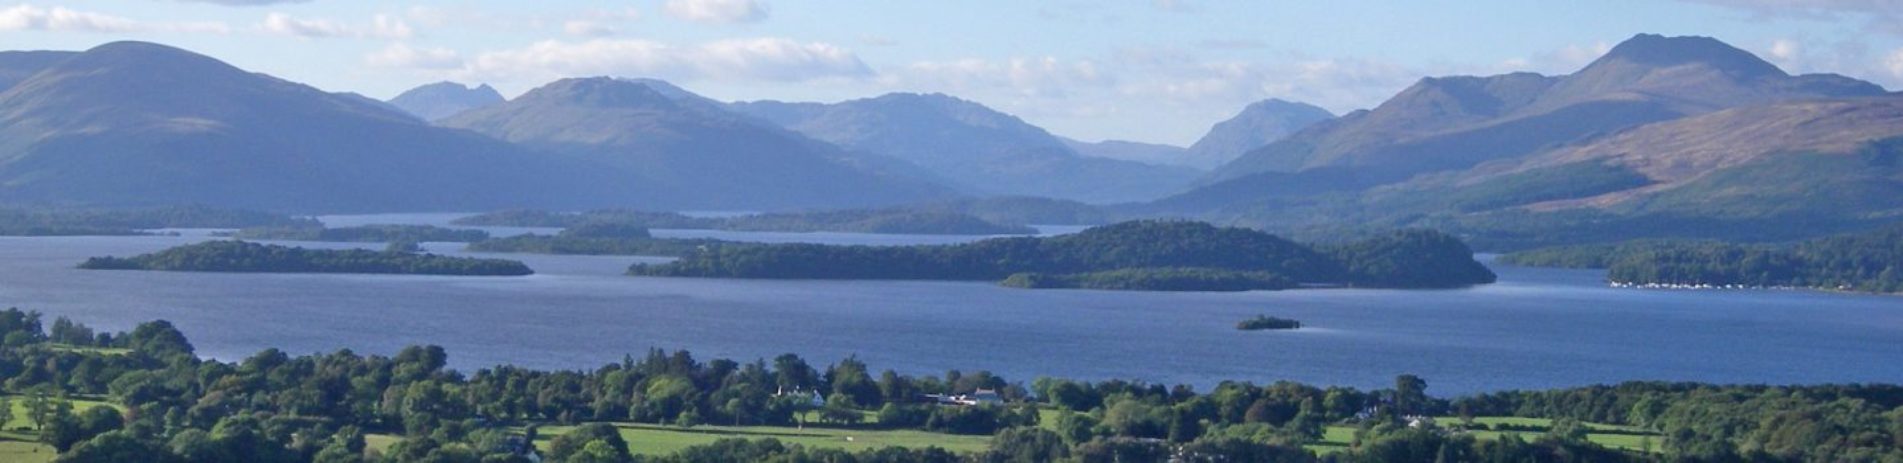 stunning-panorama-of-loch-lomond-hill-and-islands-from-duncryne-hill-or-dumpling-in-the-south-of-the-loch